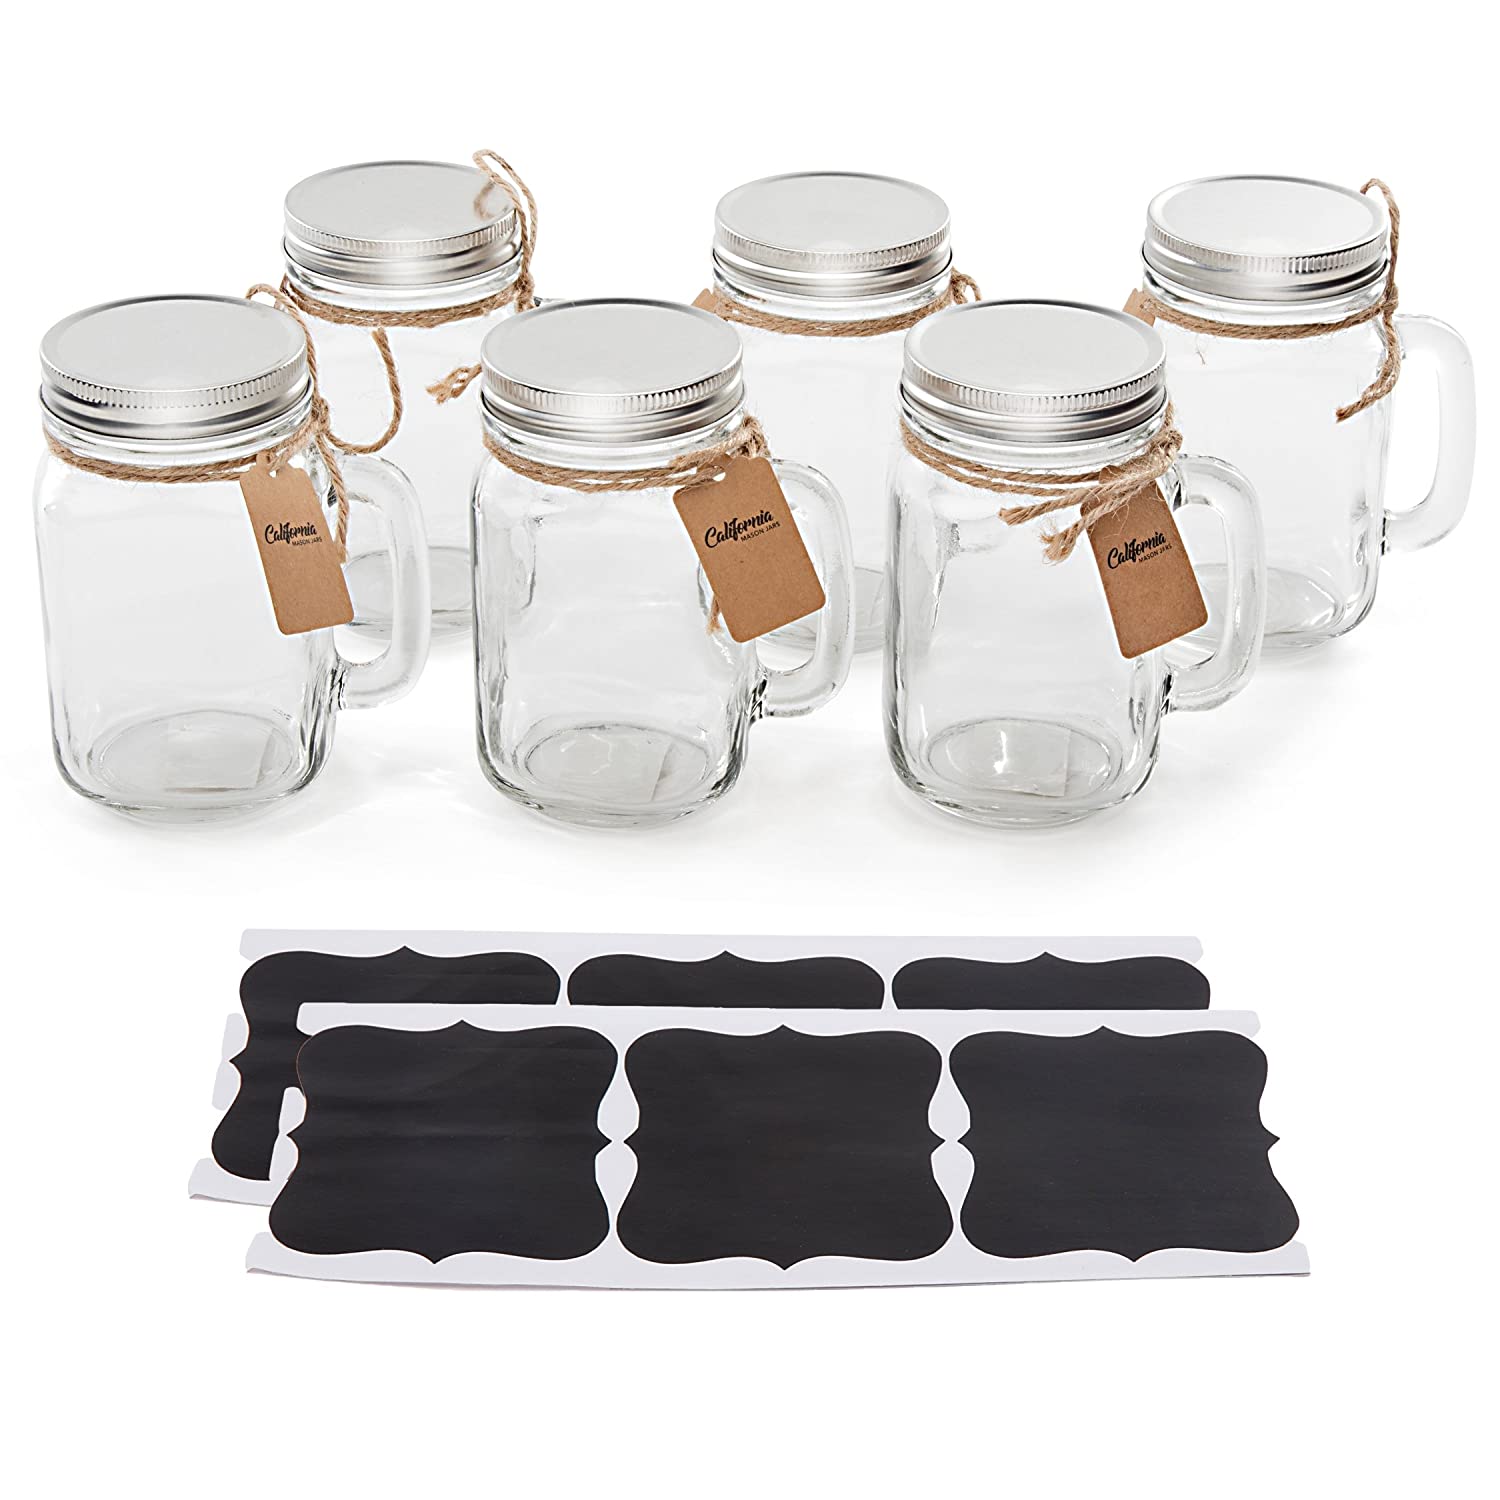 ''6 Pack - Vintage Mason Jar MUGs with Chalkboard Labels and Tin Lids, Mason MUGs with Handles for We